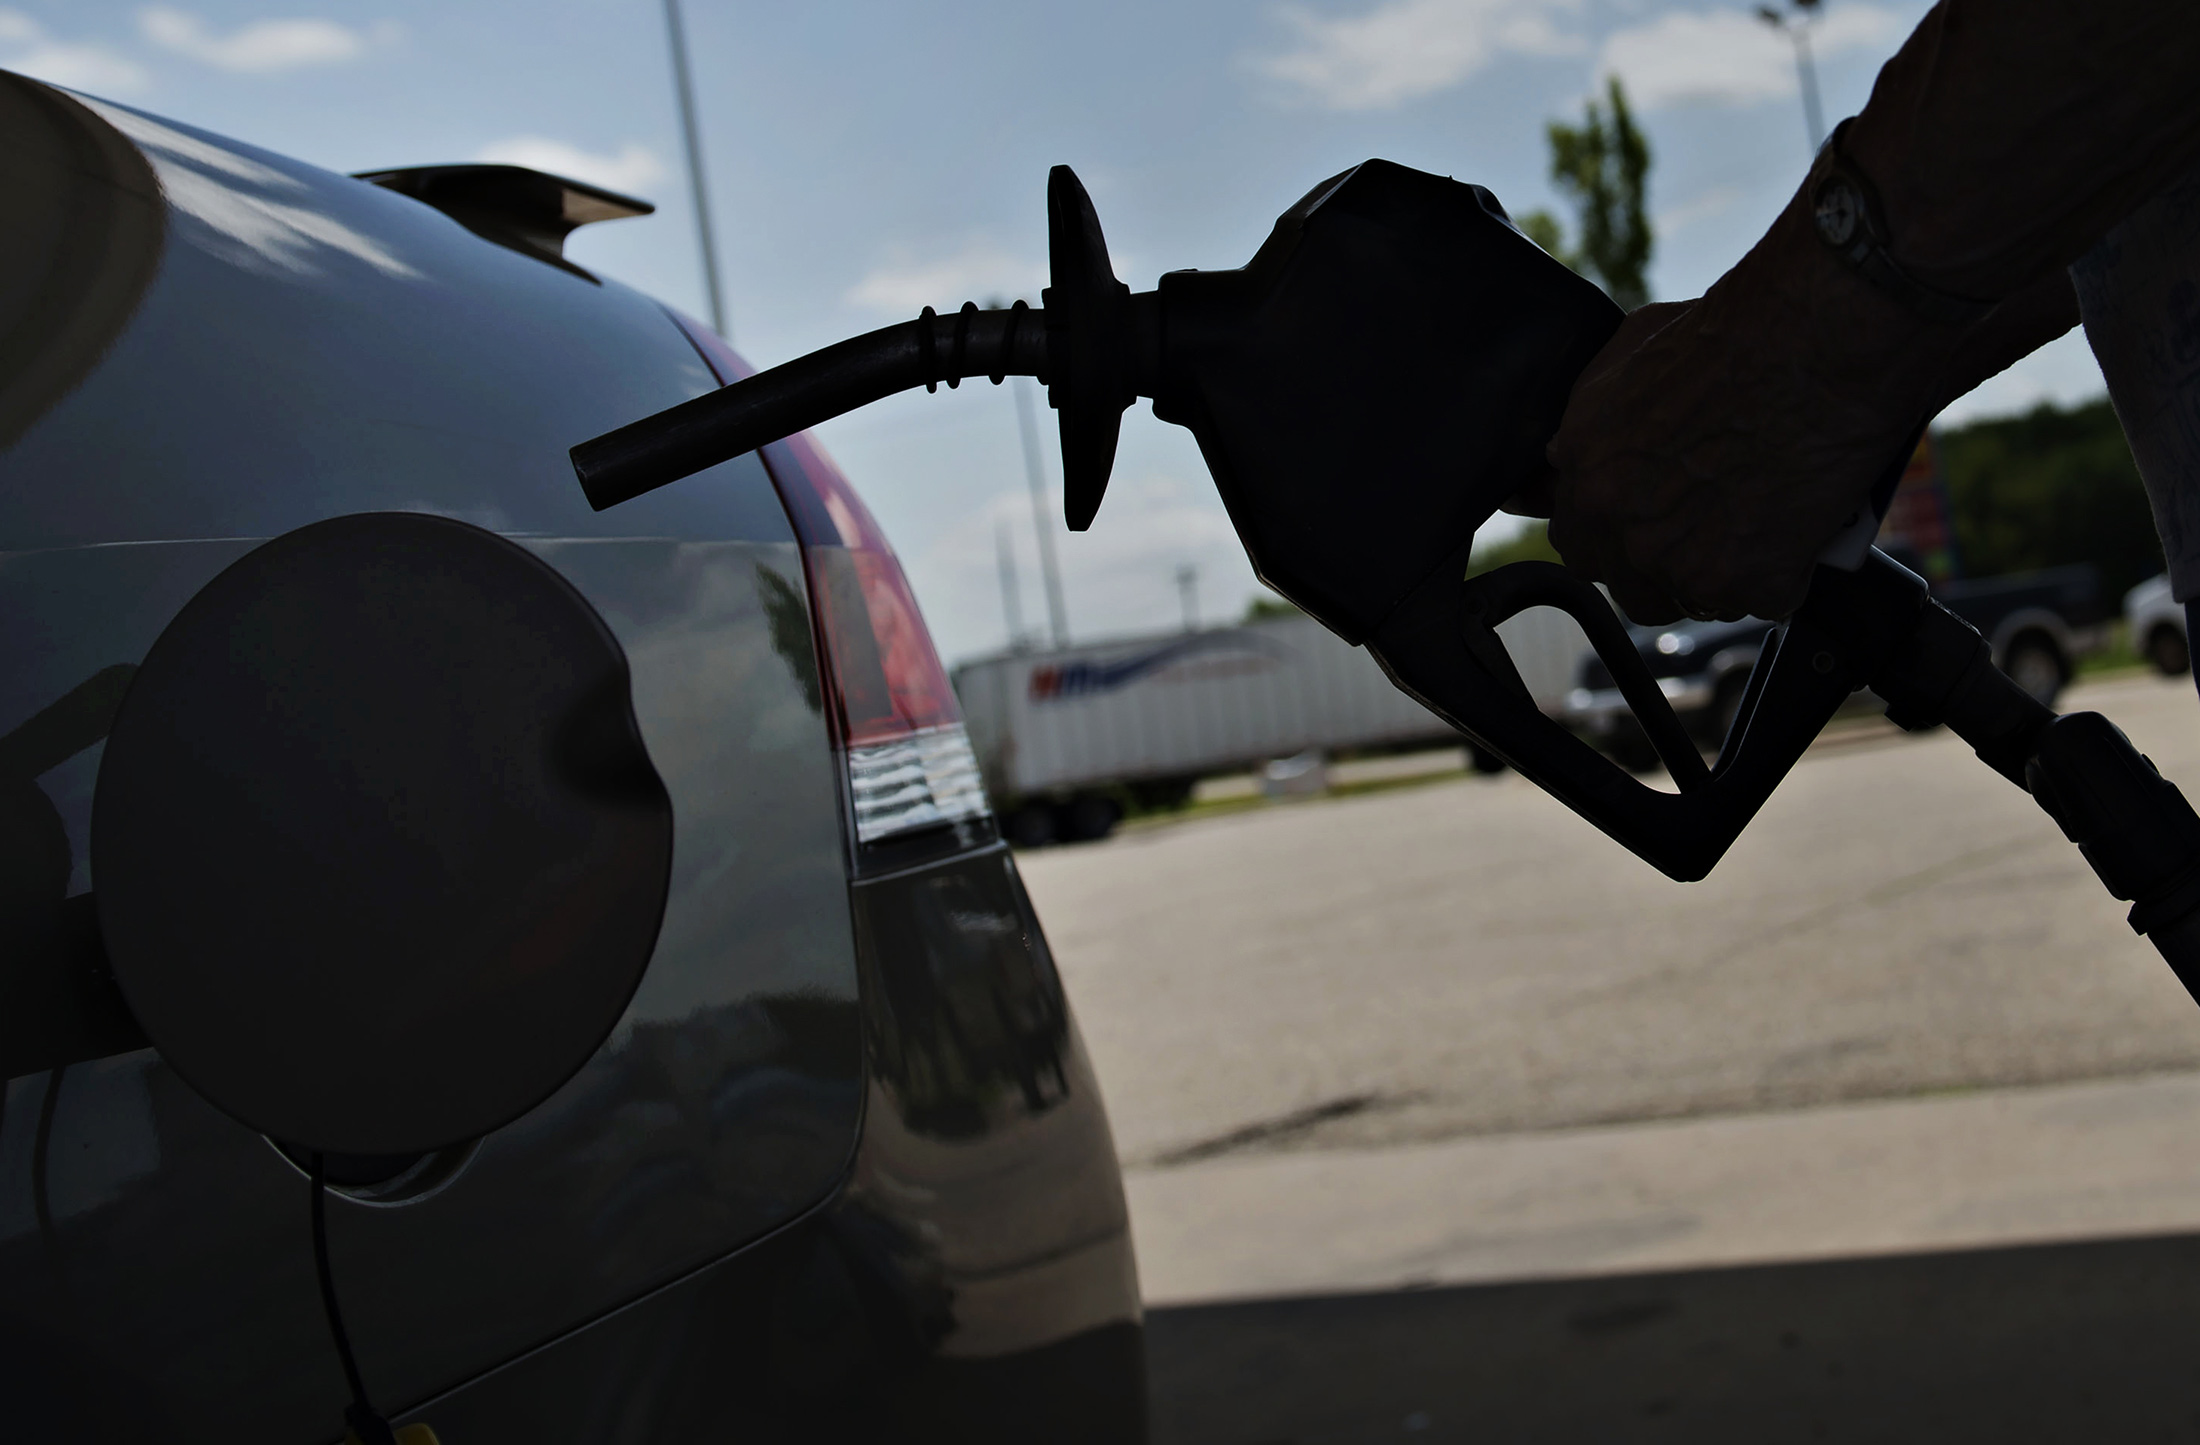 A customer prepares to fuel her vehicle at a Road Ranger gas station in Princeton, Illinois, U.S., on Tuesday, June 17, 2014. Gasoline in the U.S. climbed this week, boosted by a surge in oil, and is expected to reach the highest level for this time of year since 2008.
